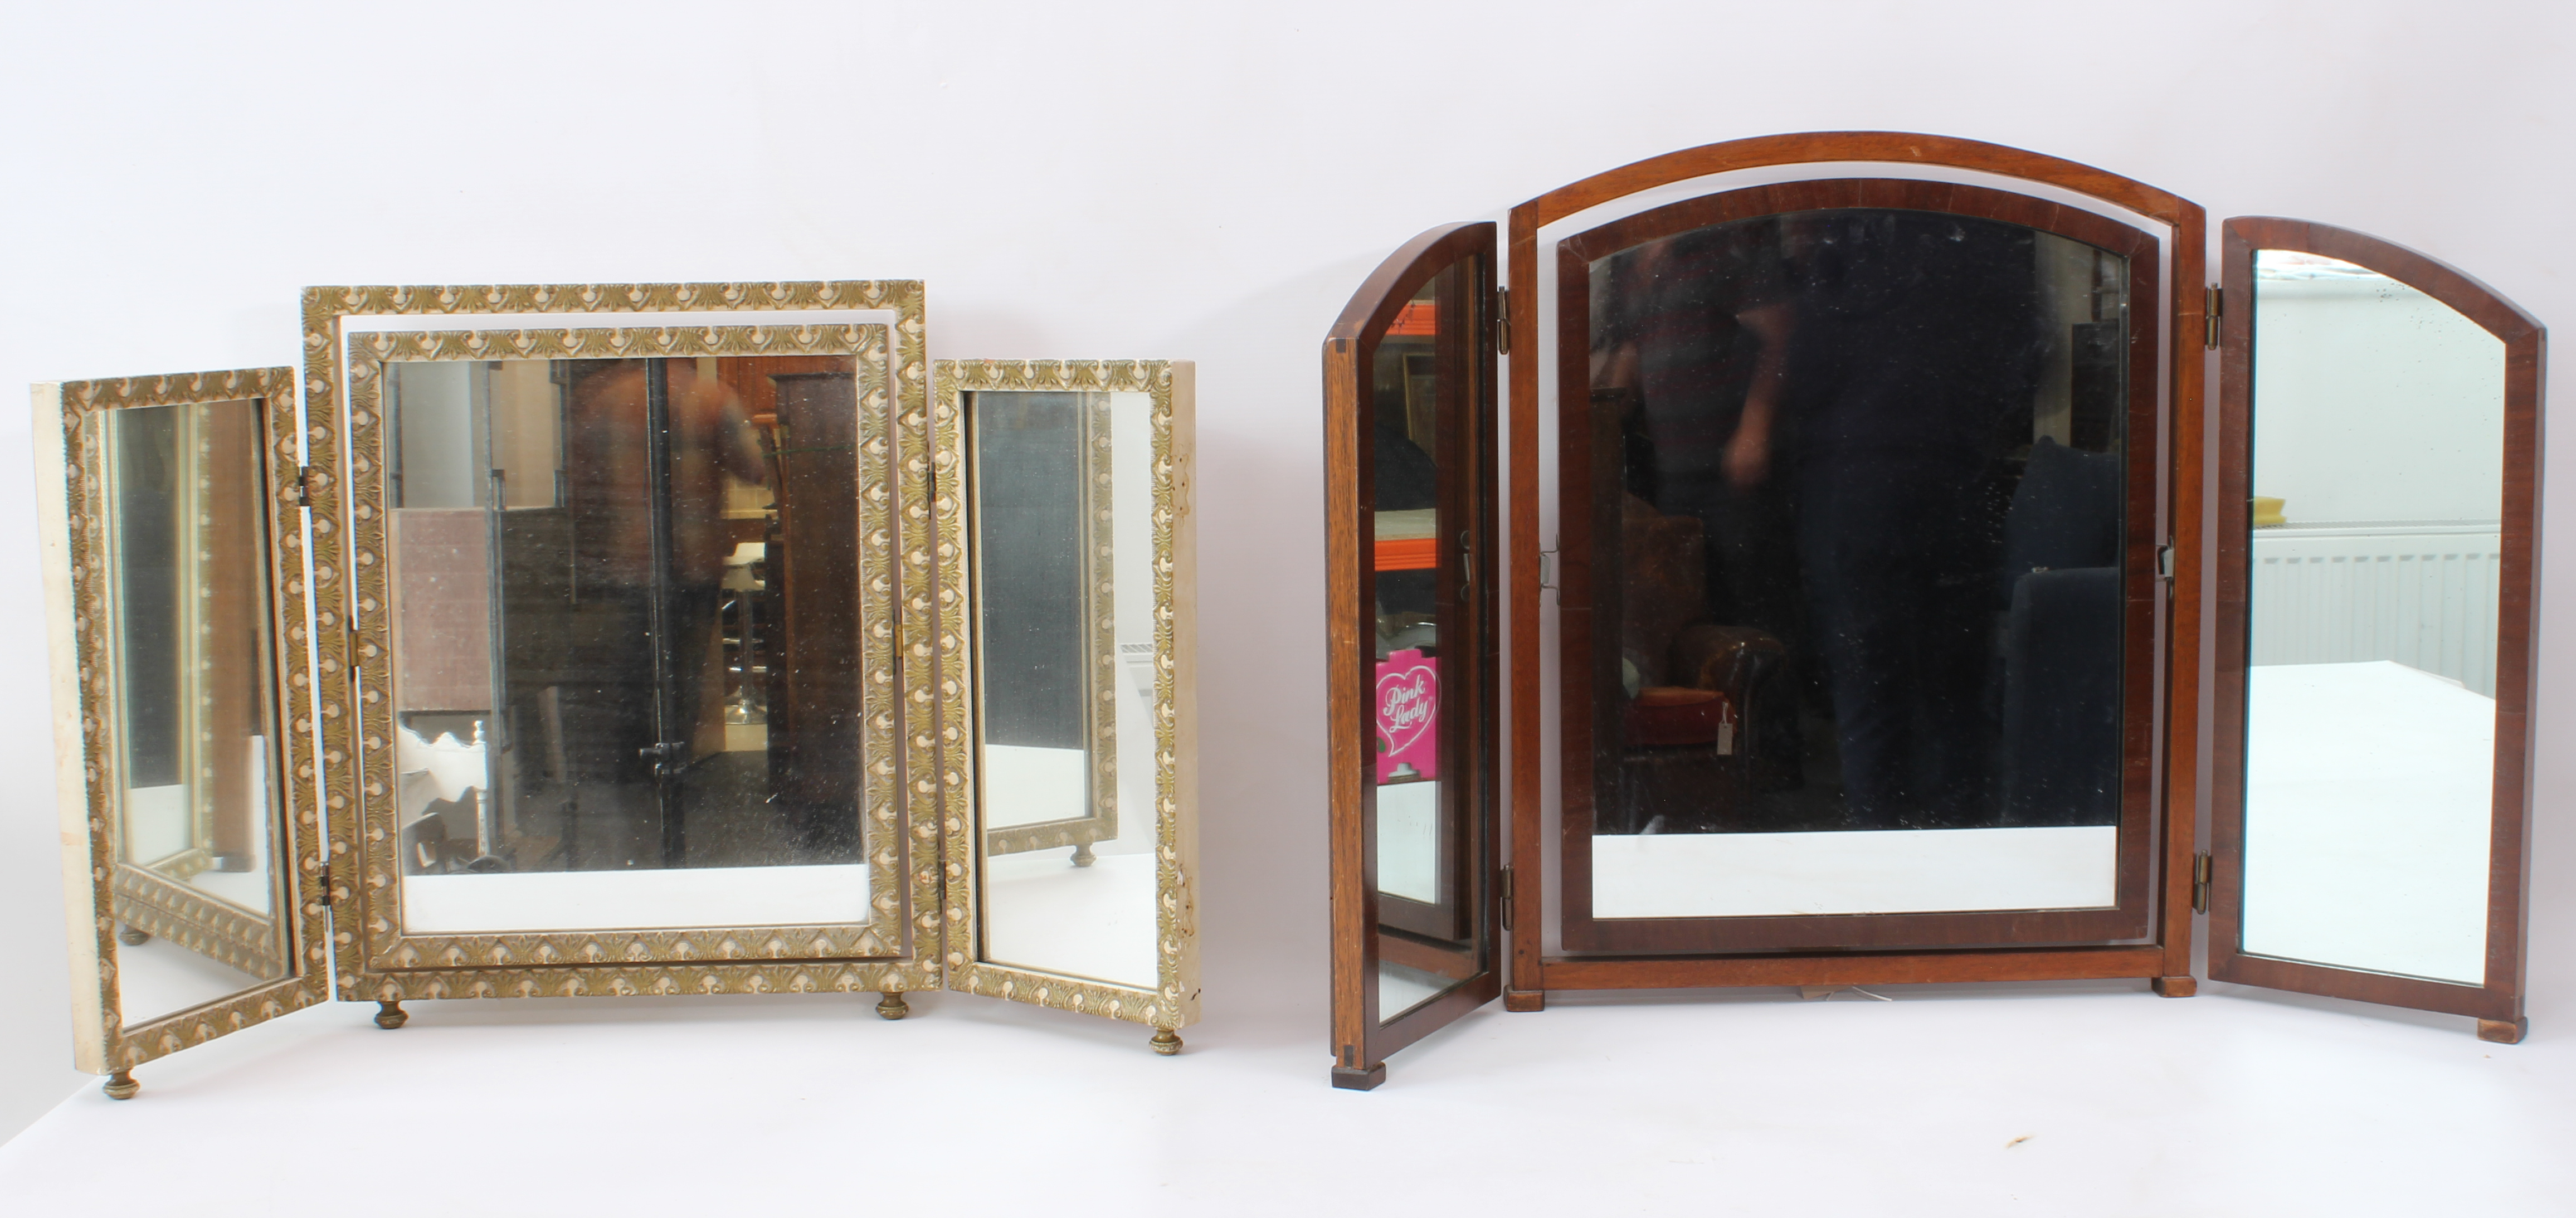 Two mid-century triple-fold dressing table mirrors - one mahogany, 57.5 cm high, 89.5 cm wide; the